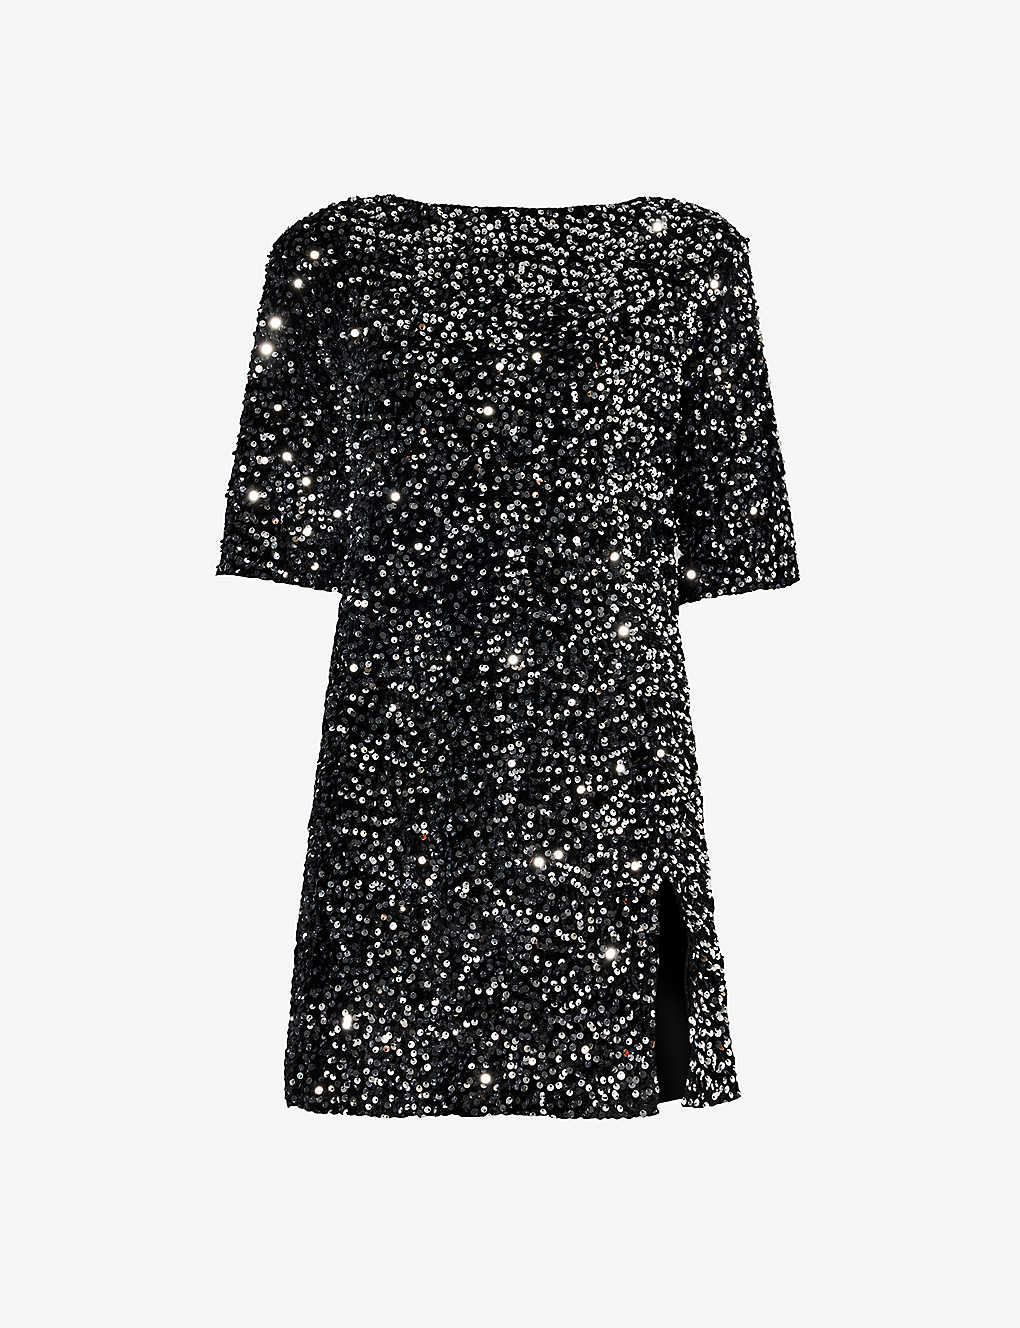 4th & Reckless Marca Silver Sequin Tie-back Short Sleeve Shift Dress In Black